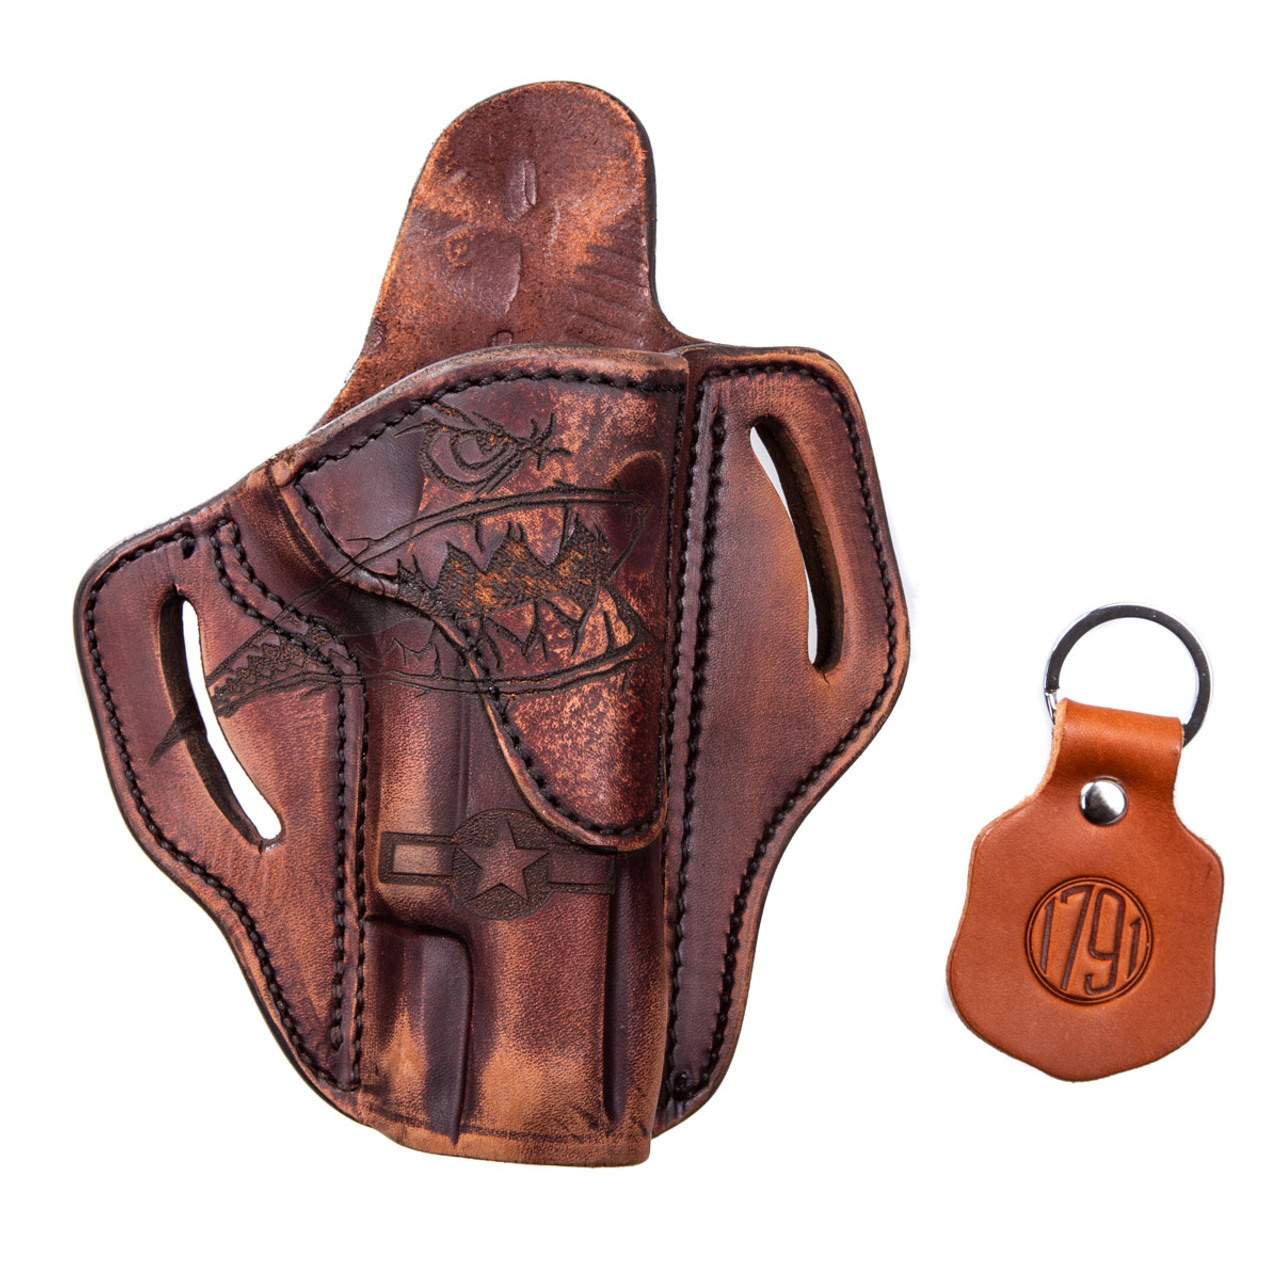 BFR Bandolier Holster, Havanna Brown with Belt Strap - Kahr Firearms Group